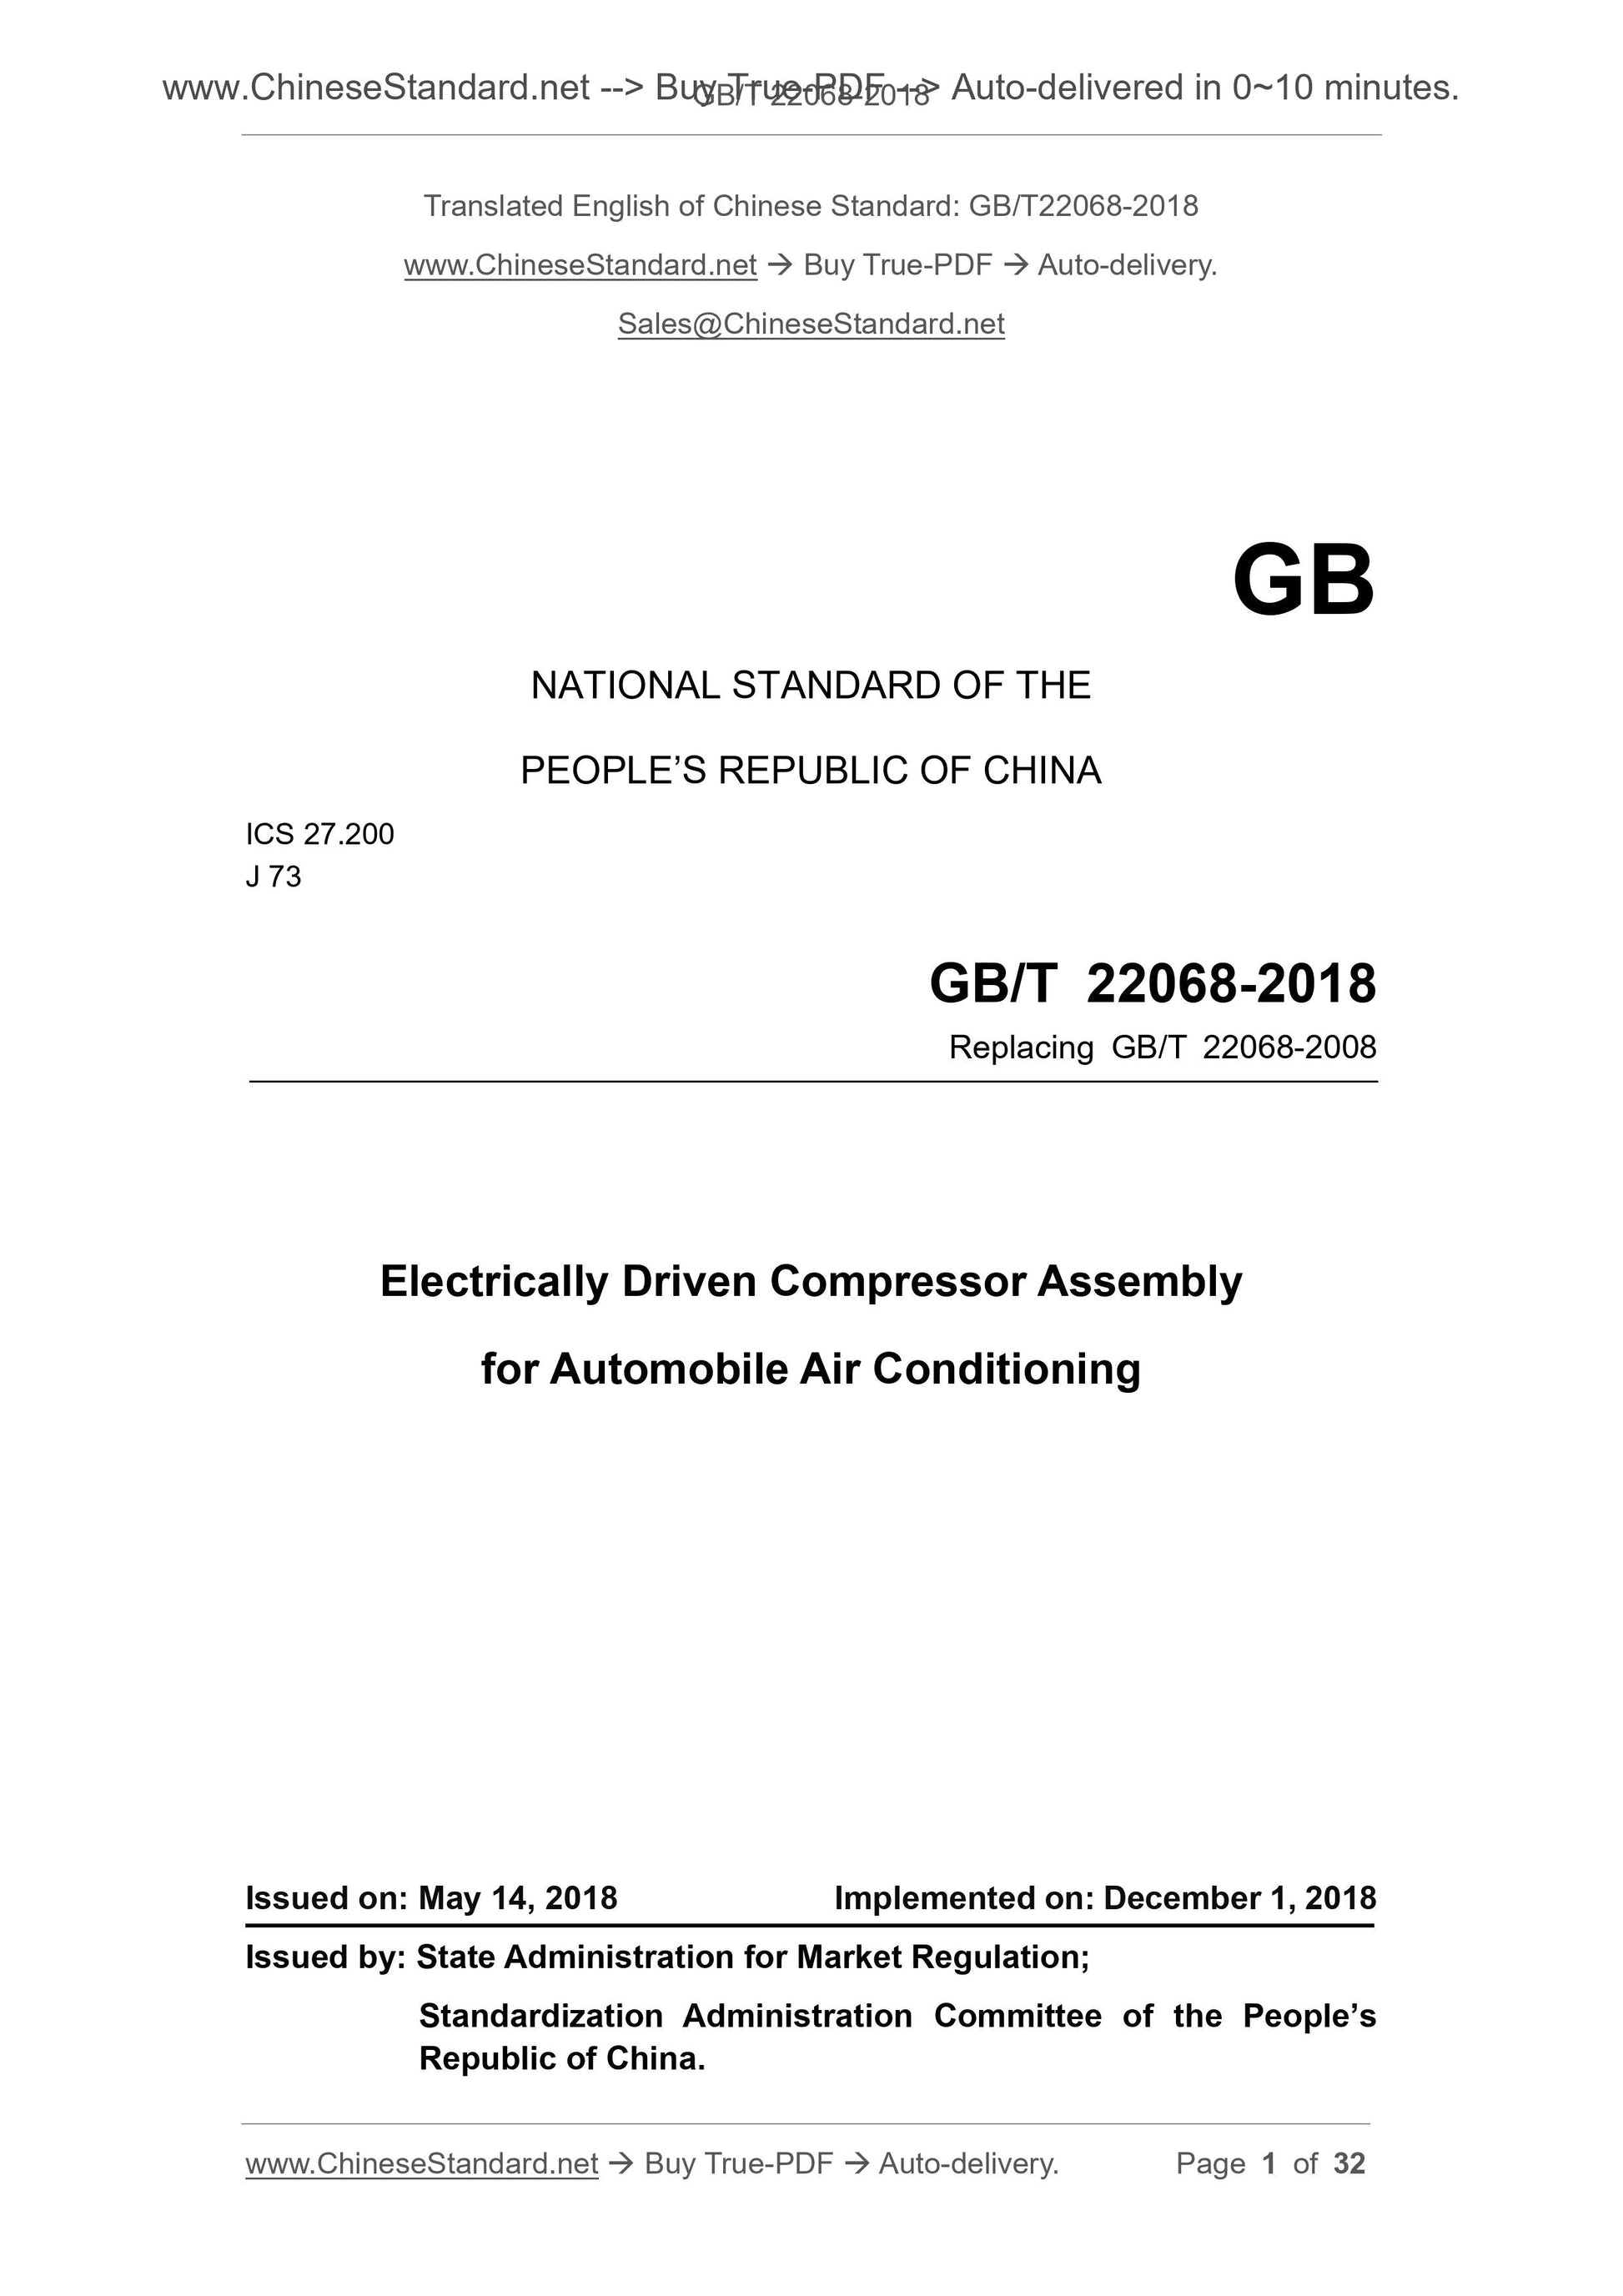 GB/T 22068-2018 Page 1